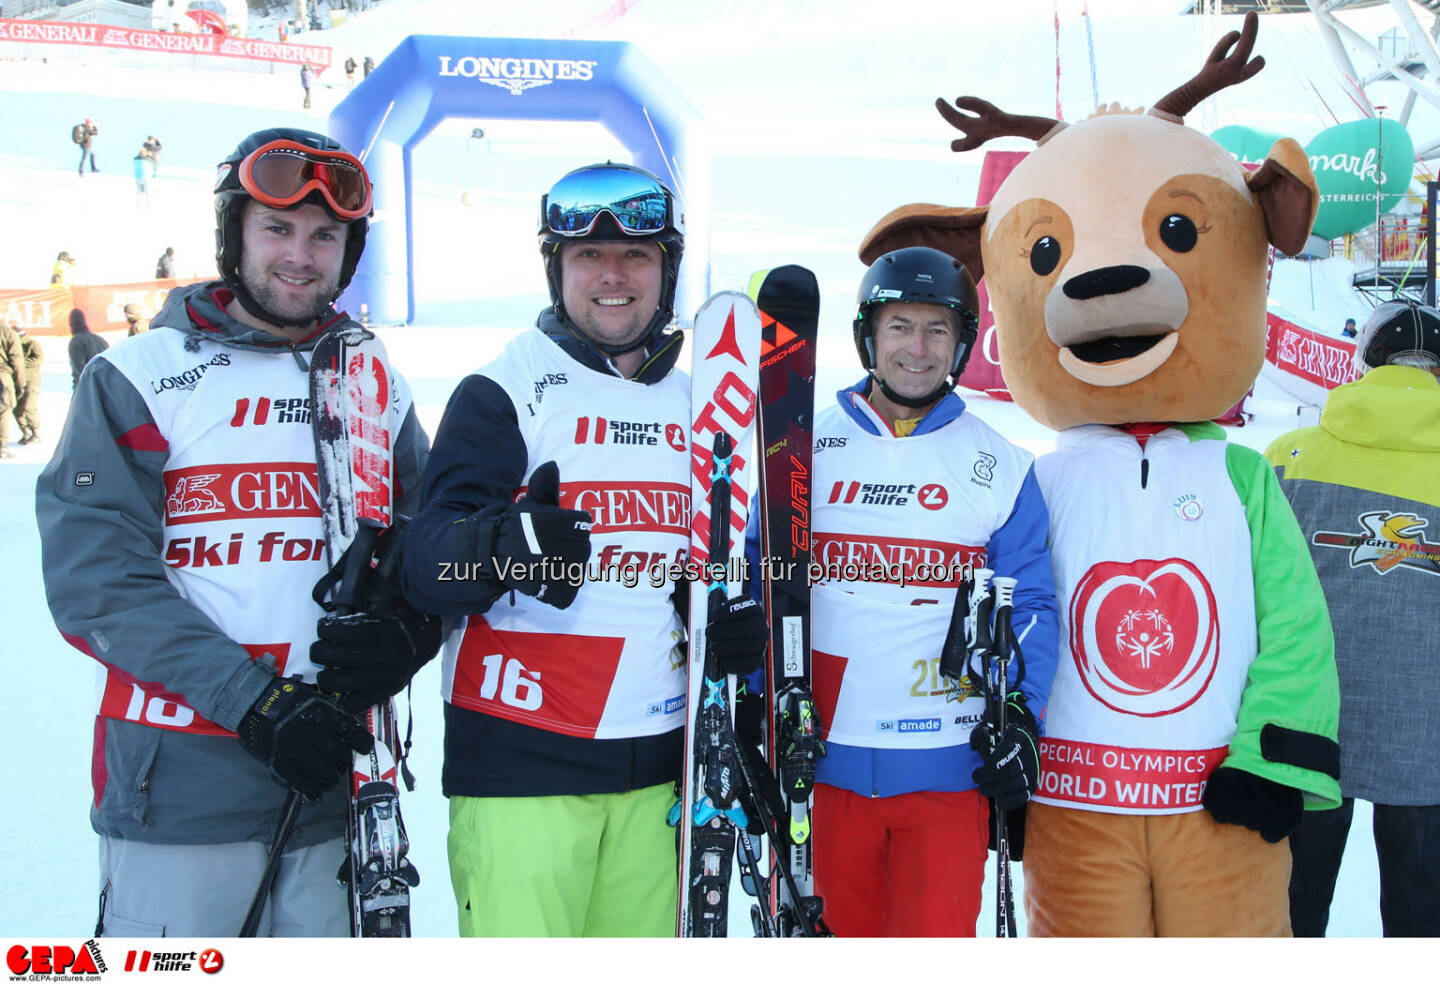 Ski for Gold Charity Race. Image shows Philipp Walcher, Mathias Schattleitner, Gottlieb Stocker and mascot Luis. Keywords: Special Olympics World Winter Games, SOWWG Austria 2017 preview. Photo: GEPA pictures/ Harald Steiner